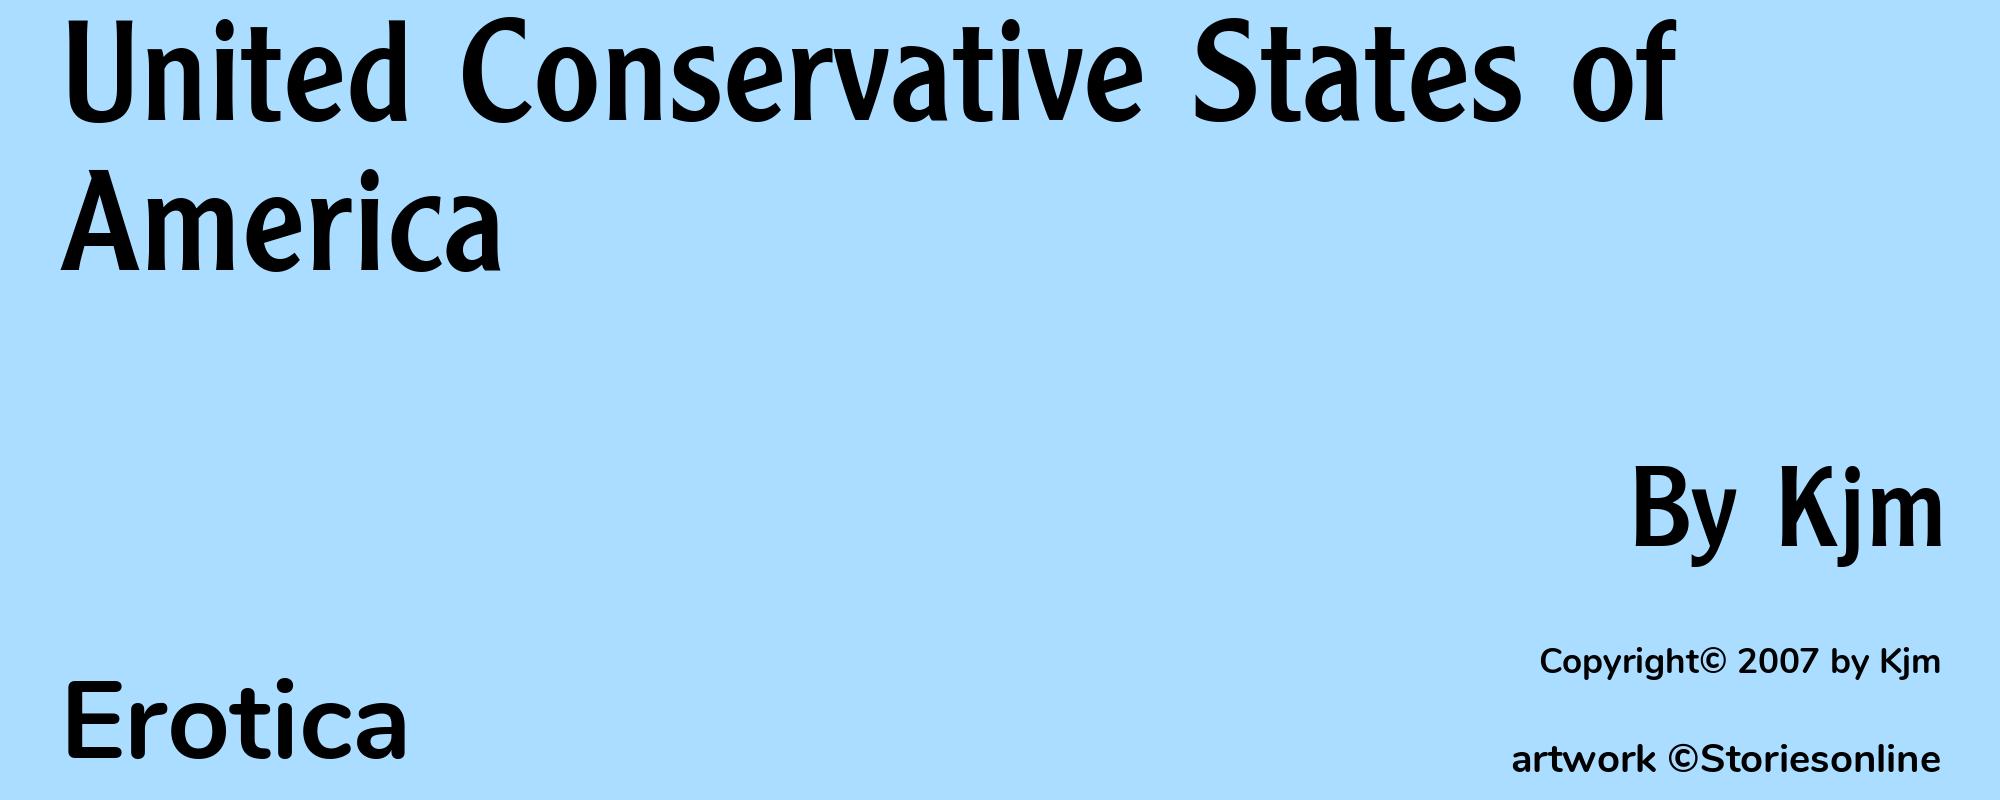 United Conservative States of America - Cover